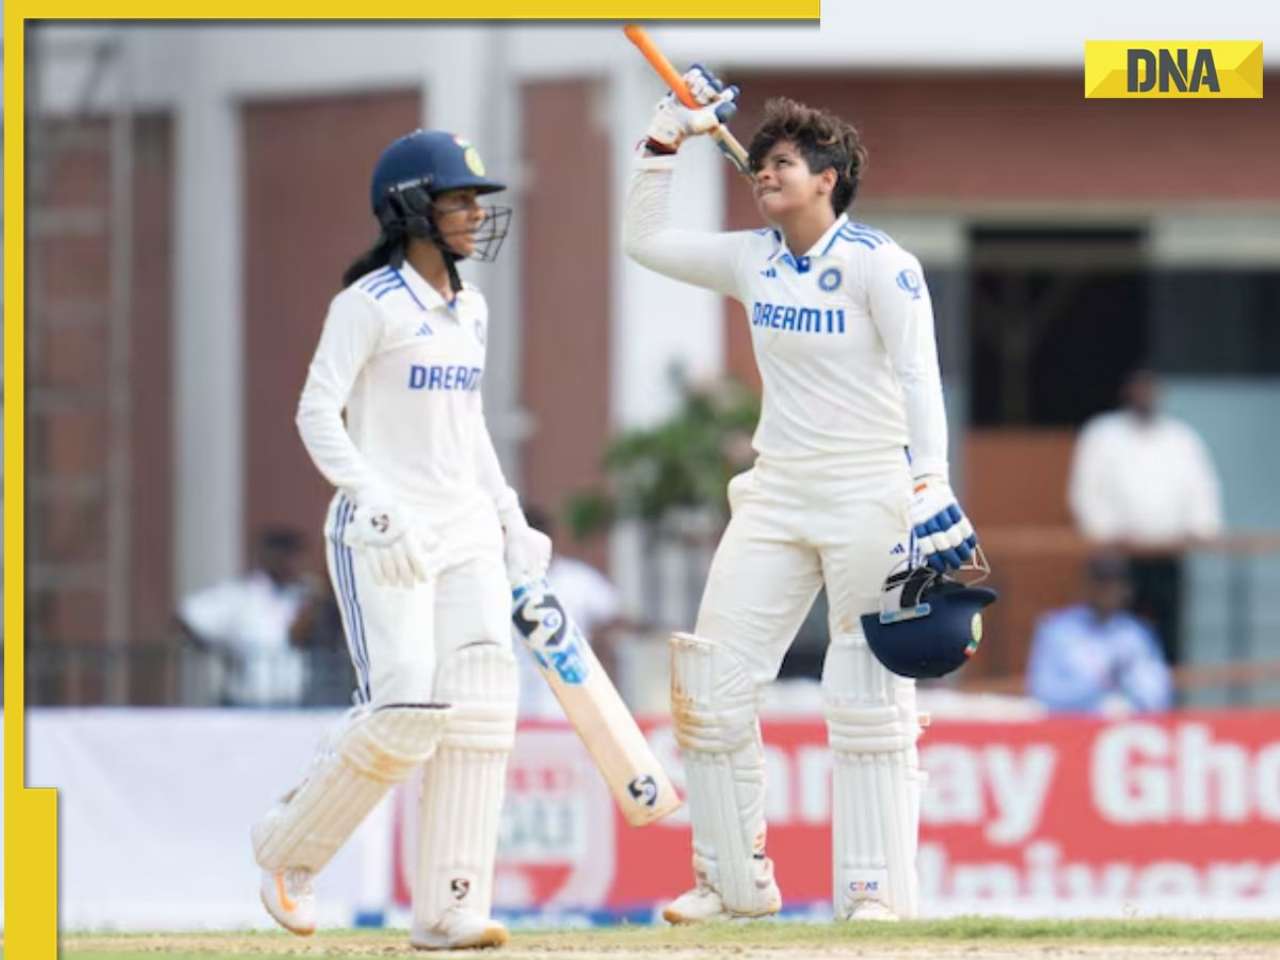 IND-W vs SA-W: Shafali Verma, Sneh Rana shine as India beat South Africa by 10 wickets in one-off Women's Test